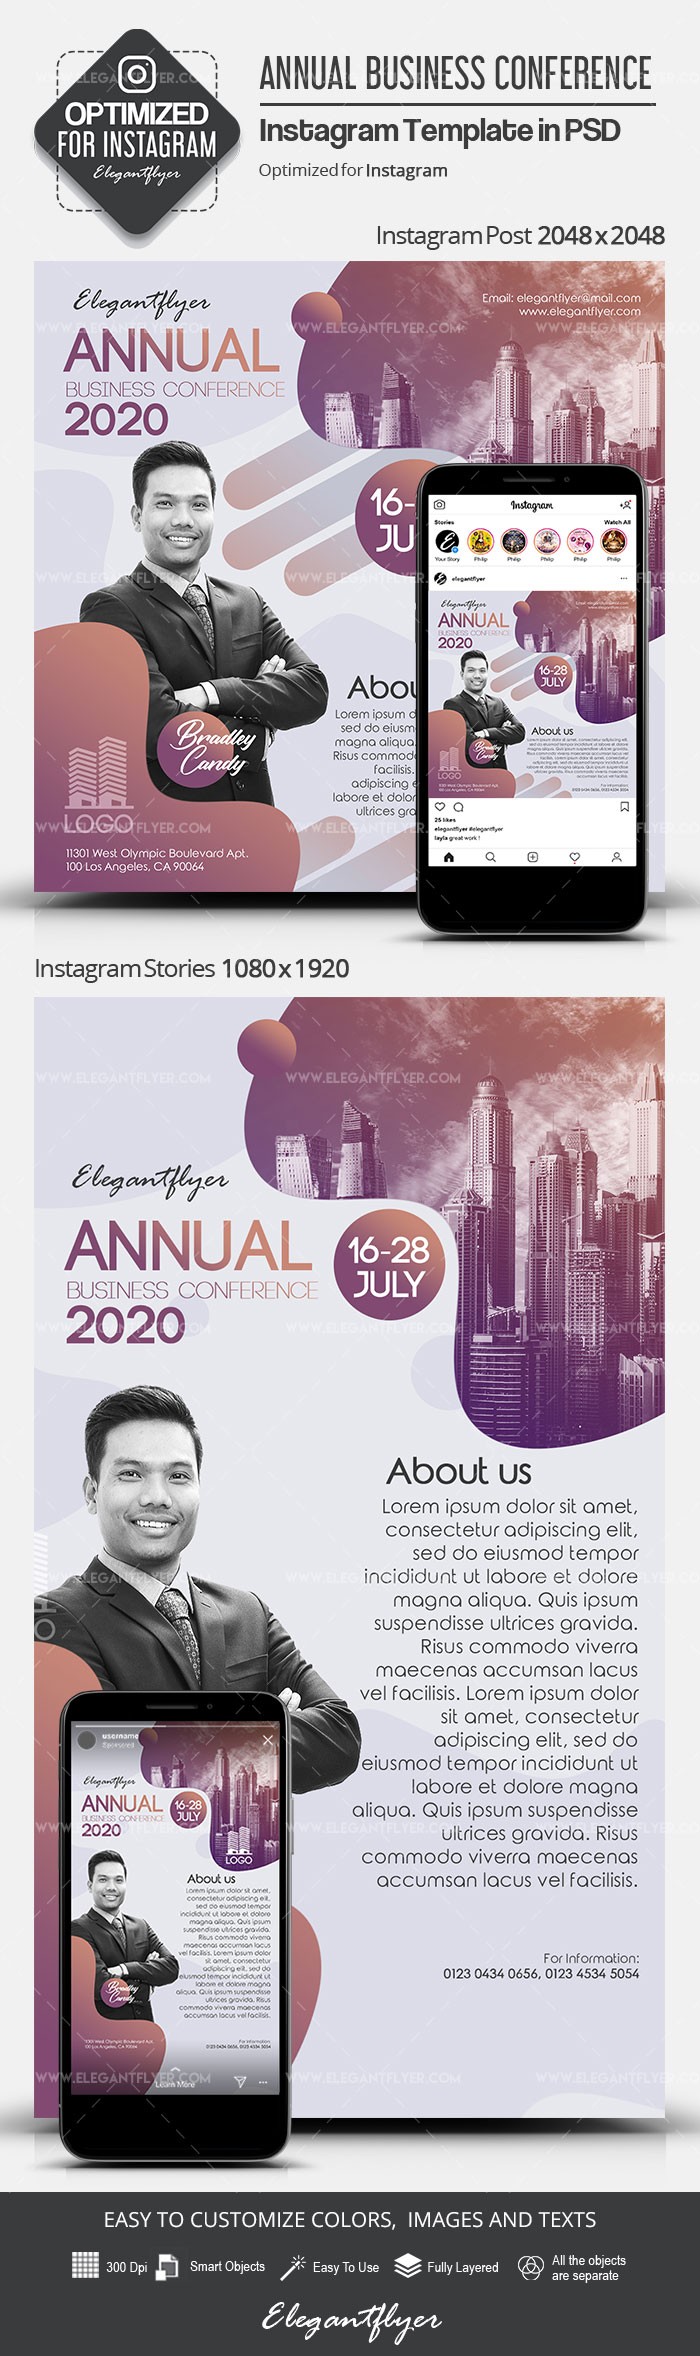 Annual Business Conference by ElegantFlyer